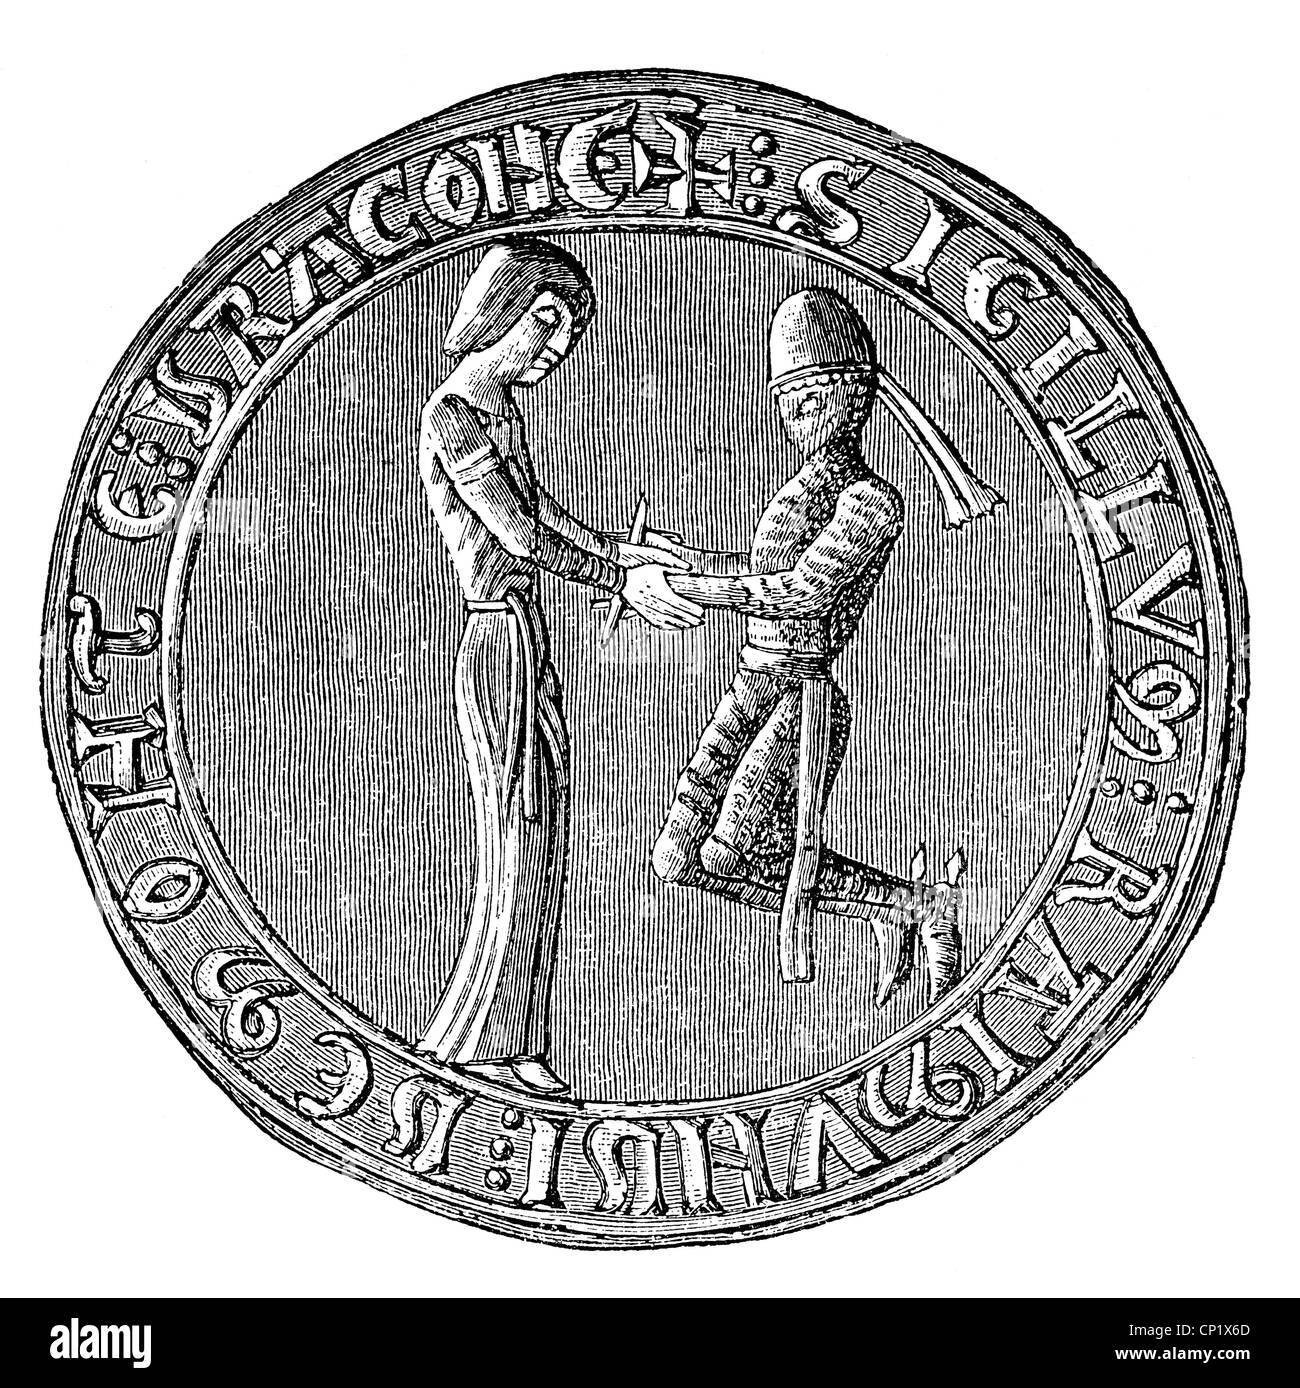 Middle Ages, knights, a knight is swearing the oath of fealty to a bishop, wood engraving, 19th century, after a seal, kneel, kneeling, fiefdom, medieval, mediaeval, clergyman, clergy, soldier, soldiers, warrior, warriors, feudal lord, seigneur, liege, knight's armour, knight's armor, oath, oaths, swearing, swear, oath of allegiance, loyalty, faithfulness, fidelity, conjugal faith, vow, vowing, historic, historical, people, Additional-Rights-Clearences-Not Available Stock Photo